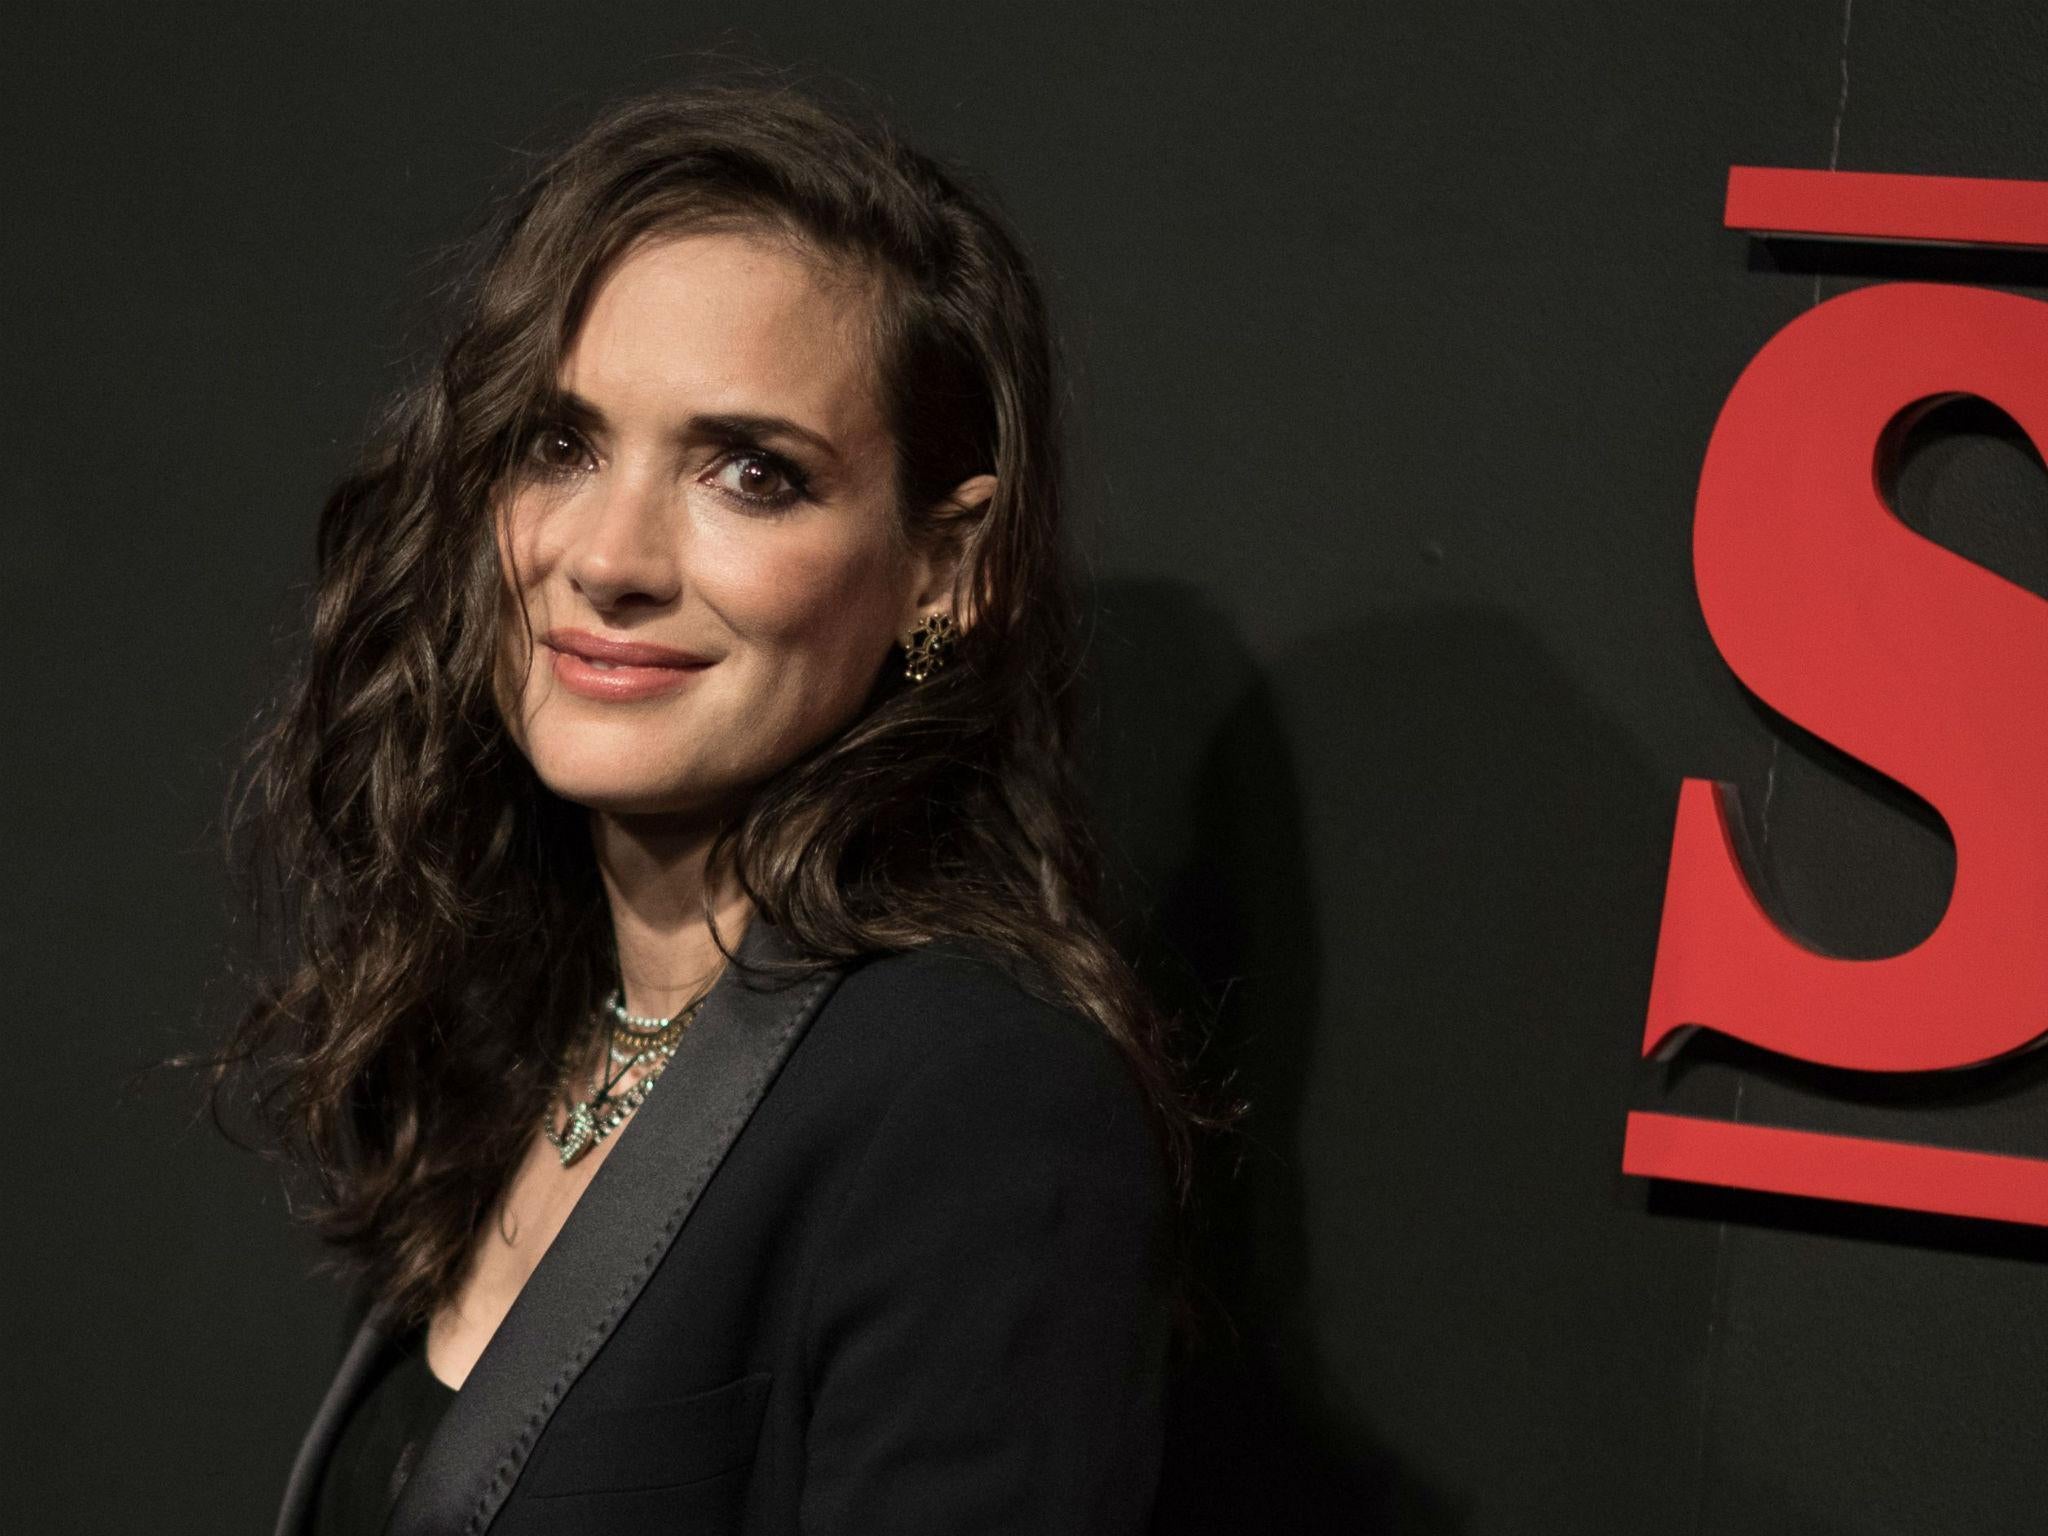 Winona Ryder is ideal in Eighties mystery series ‘Stranger Things’, but